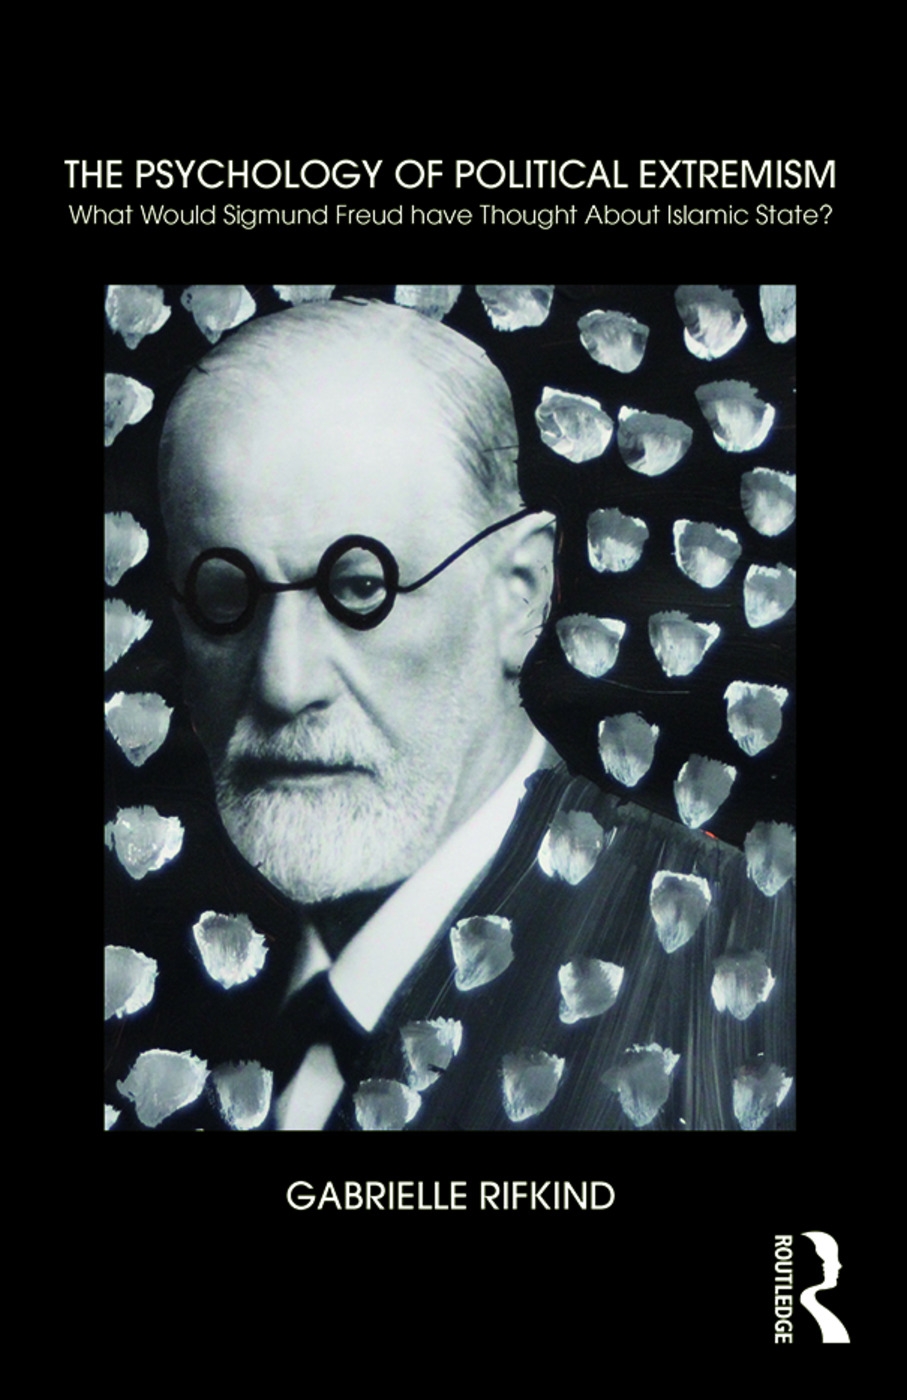 The Psychology of Political Extremism: What Would Sigmund Freud Have Thought about Islamic State?